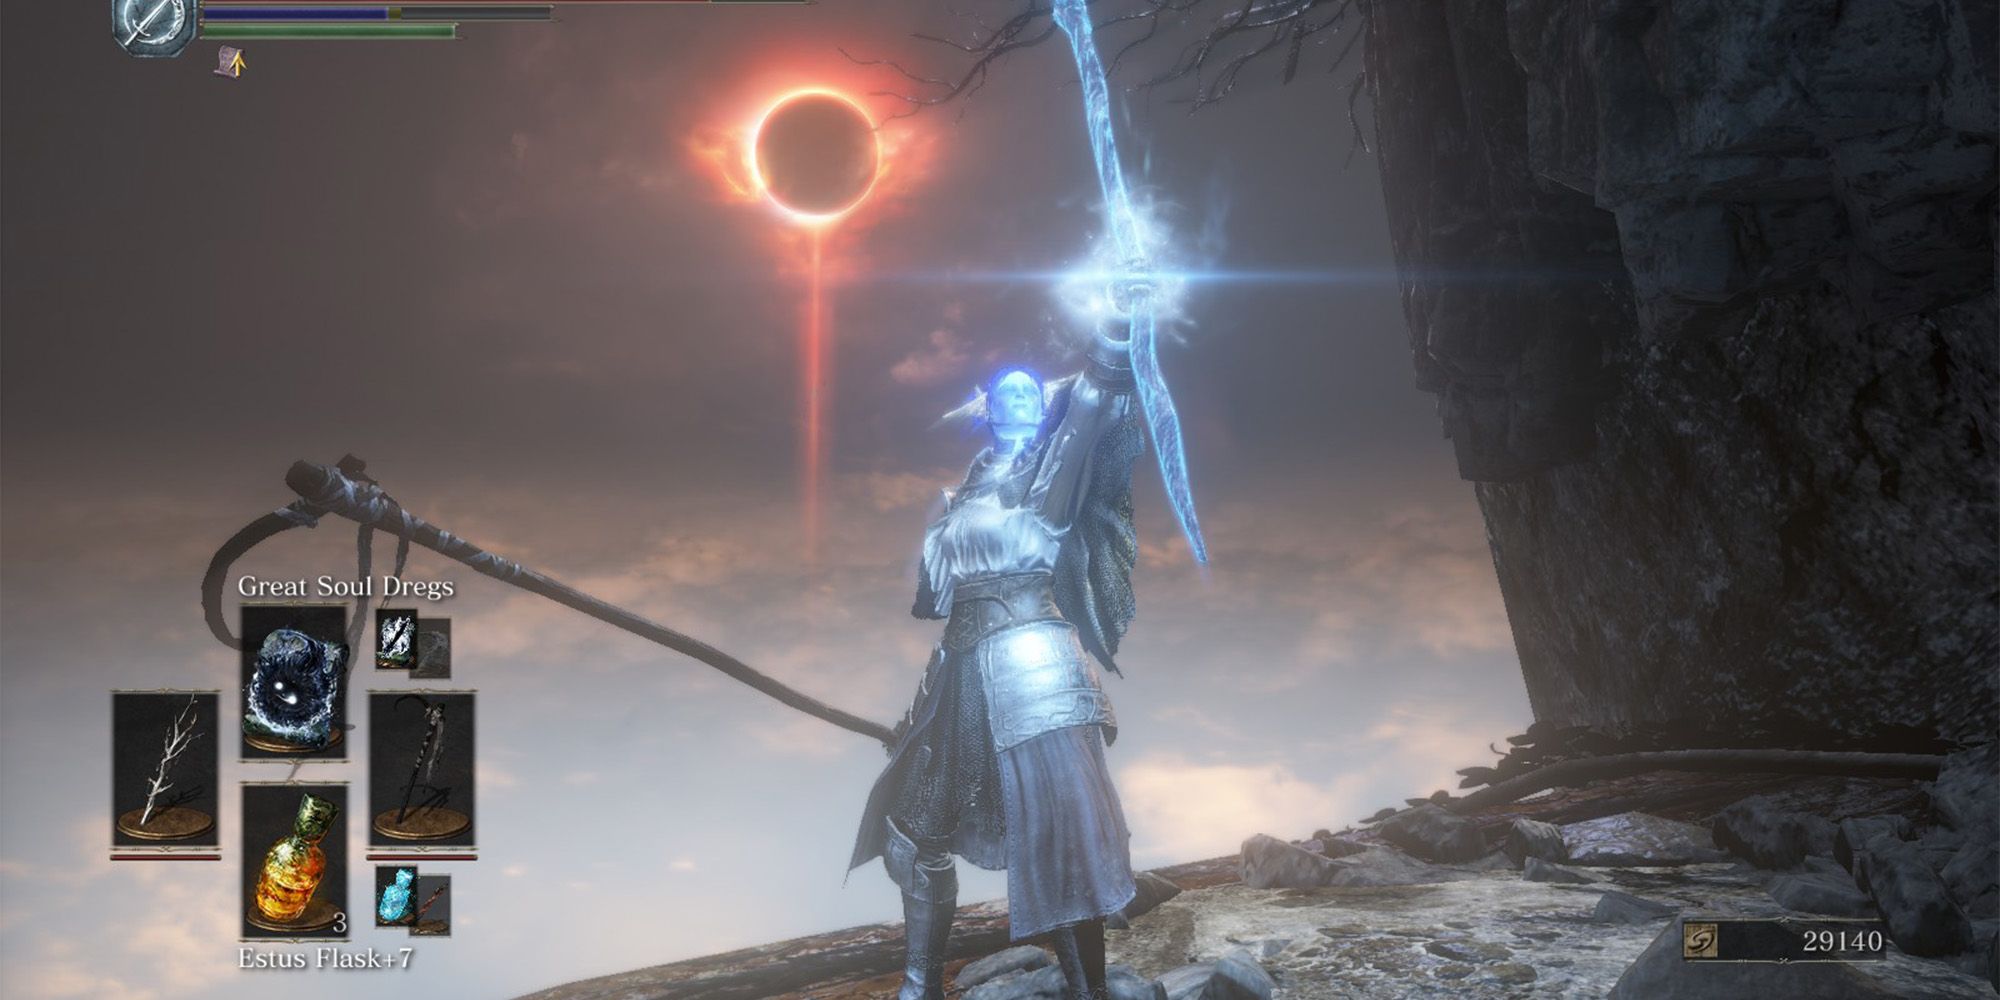 A player wielding the Murky Longstaff while wearing the Sunless Armor set in the Ringed City DLC in Dark Souls 3